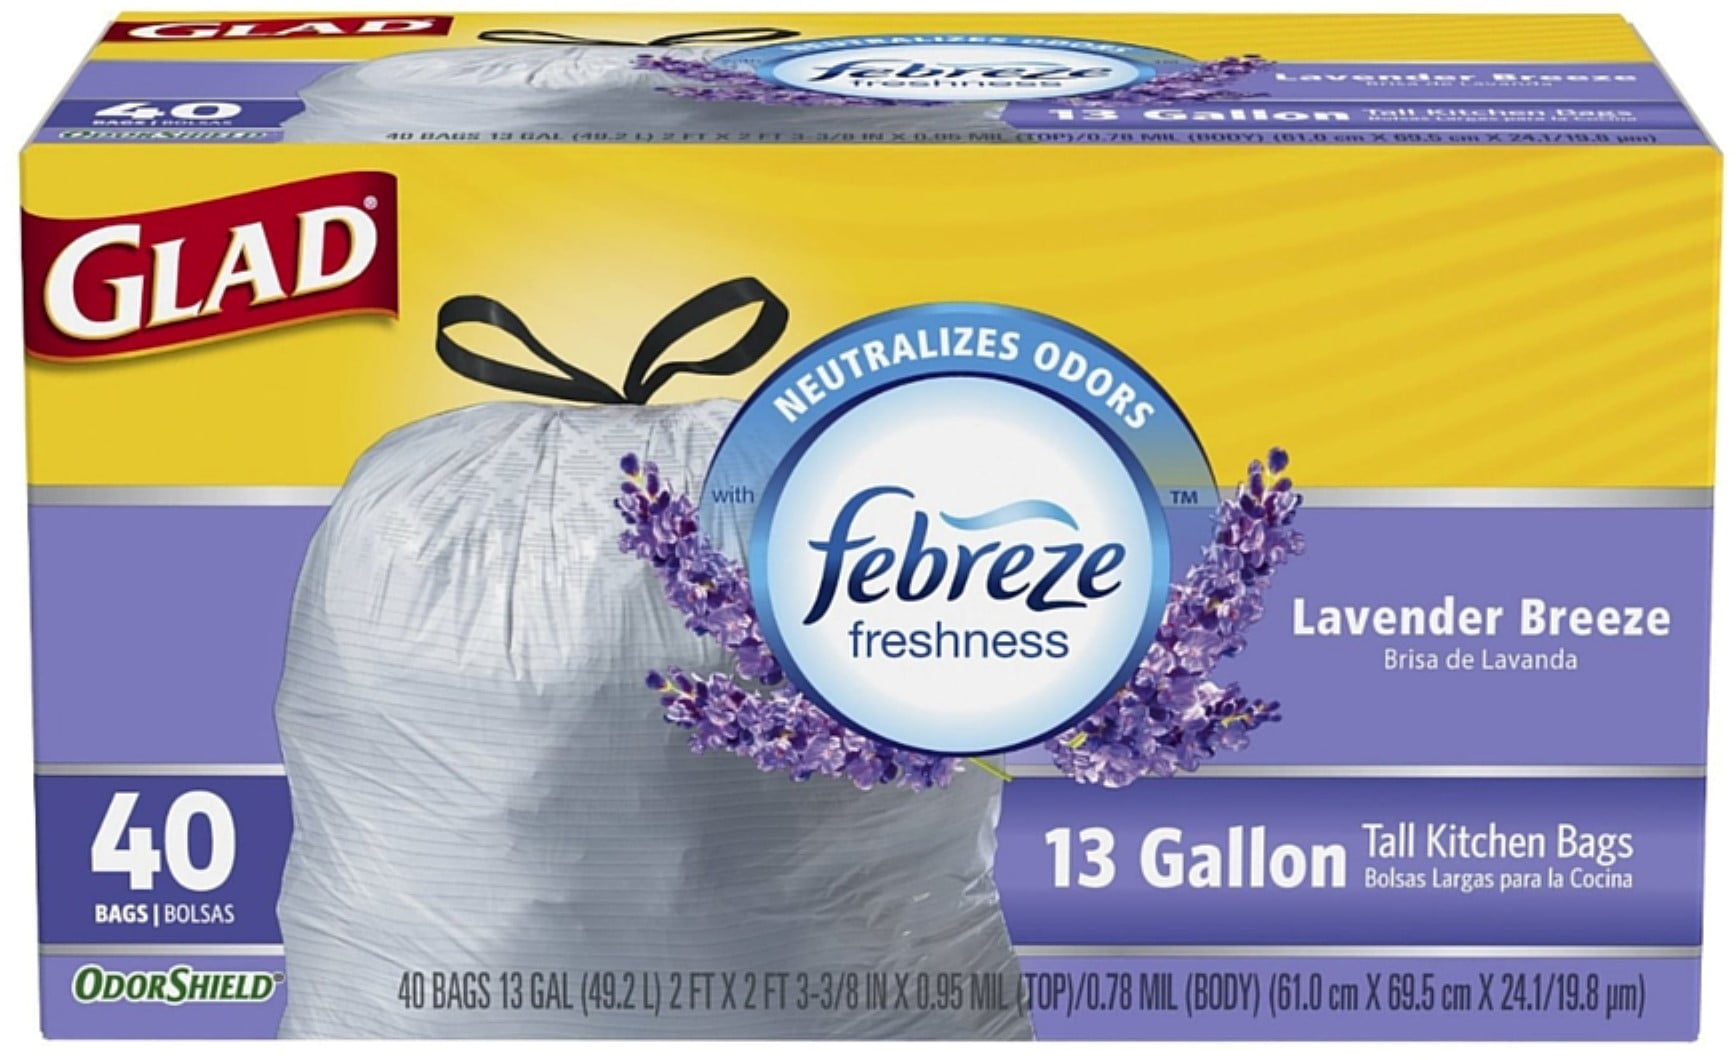 Tall Kitchen Drawstring Trash Bags – 13 Gallon Trash Bag, Fresh Clean Scent with Febreze Freshness – 80 Count (Package May Vary)